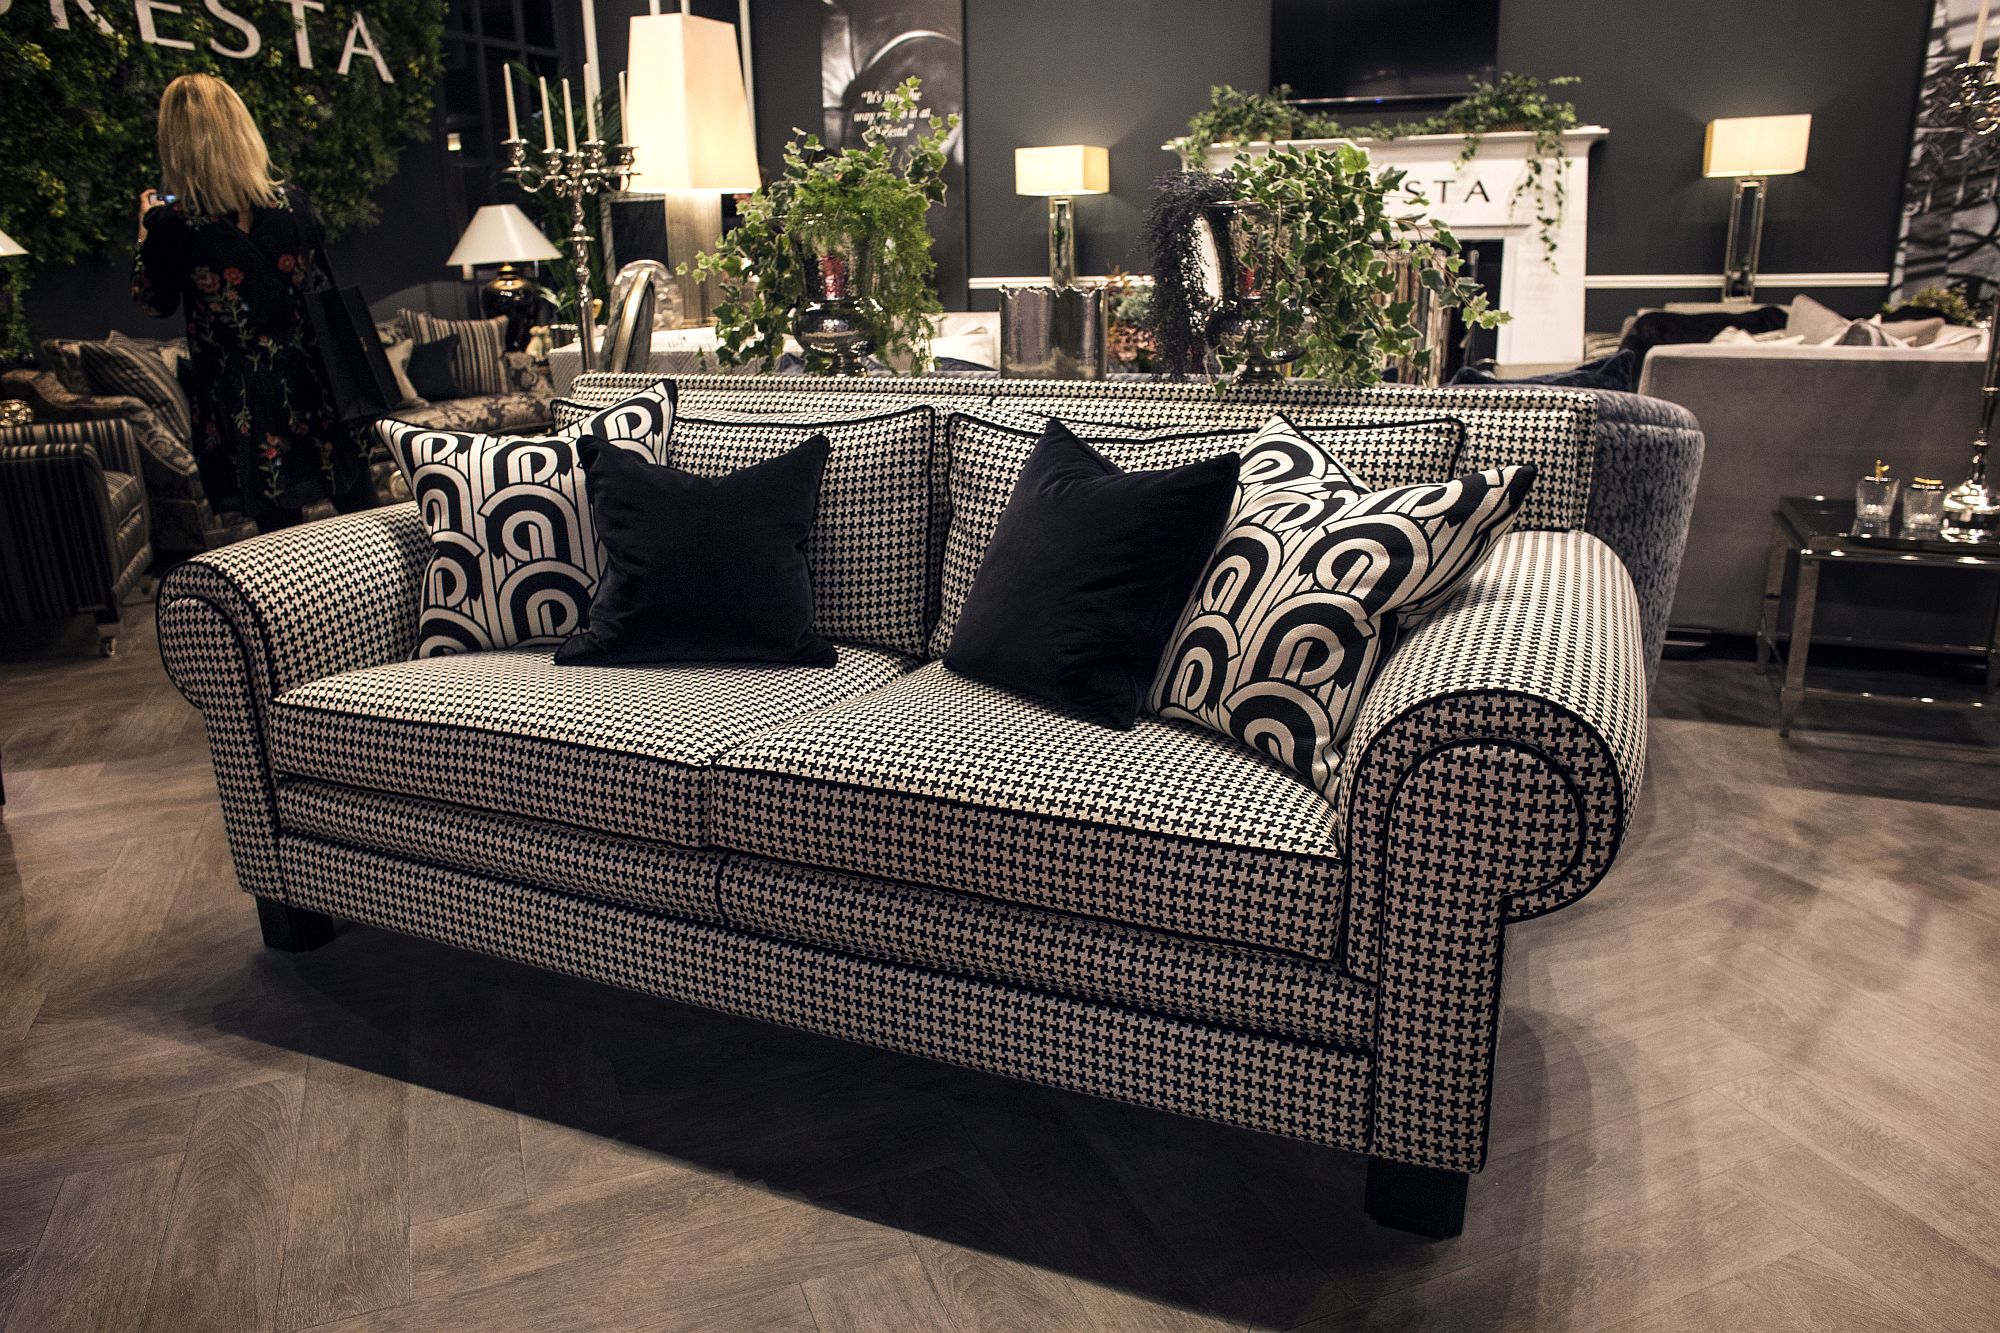 Simple-black-and-white-pattern-of-the-sofa-brings-unique-charm-to-any-living-space-it-adorns